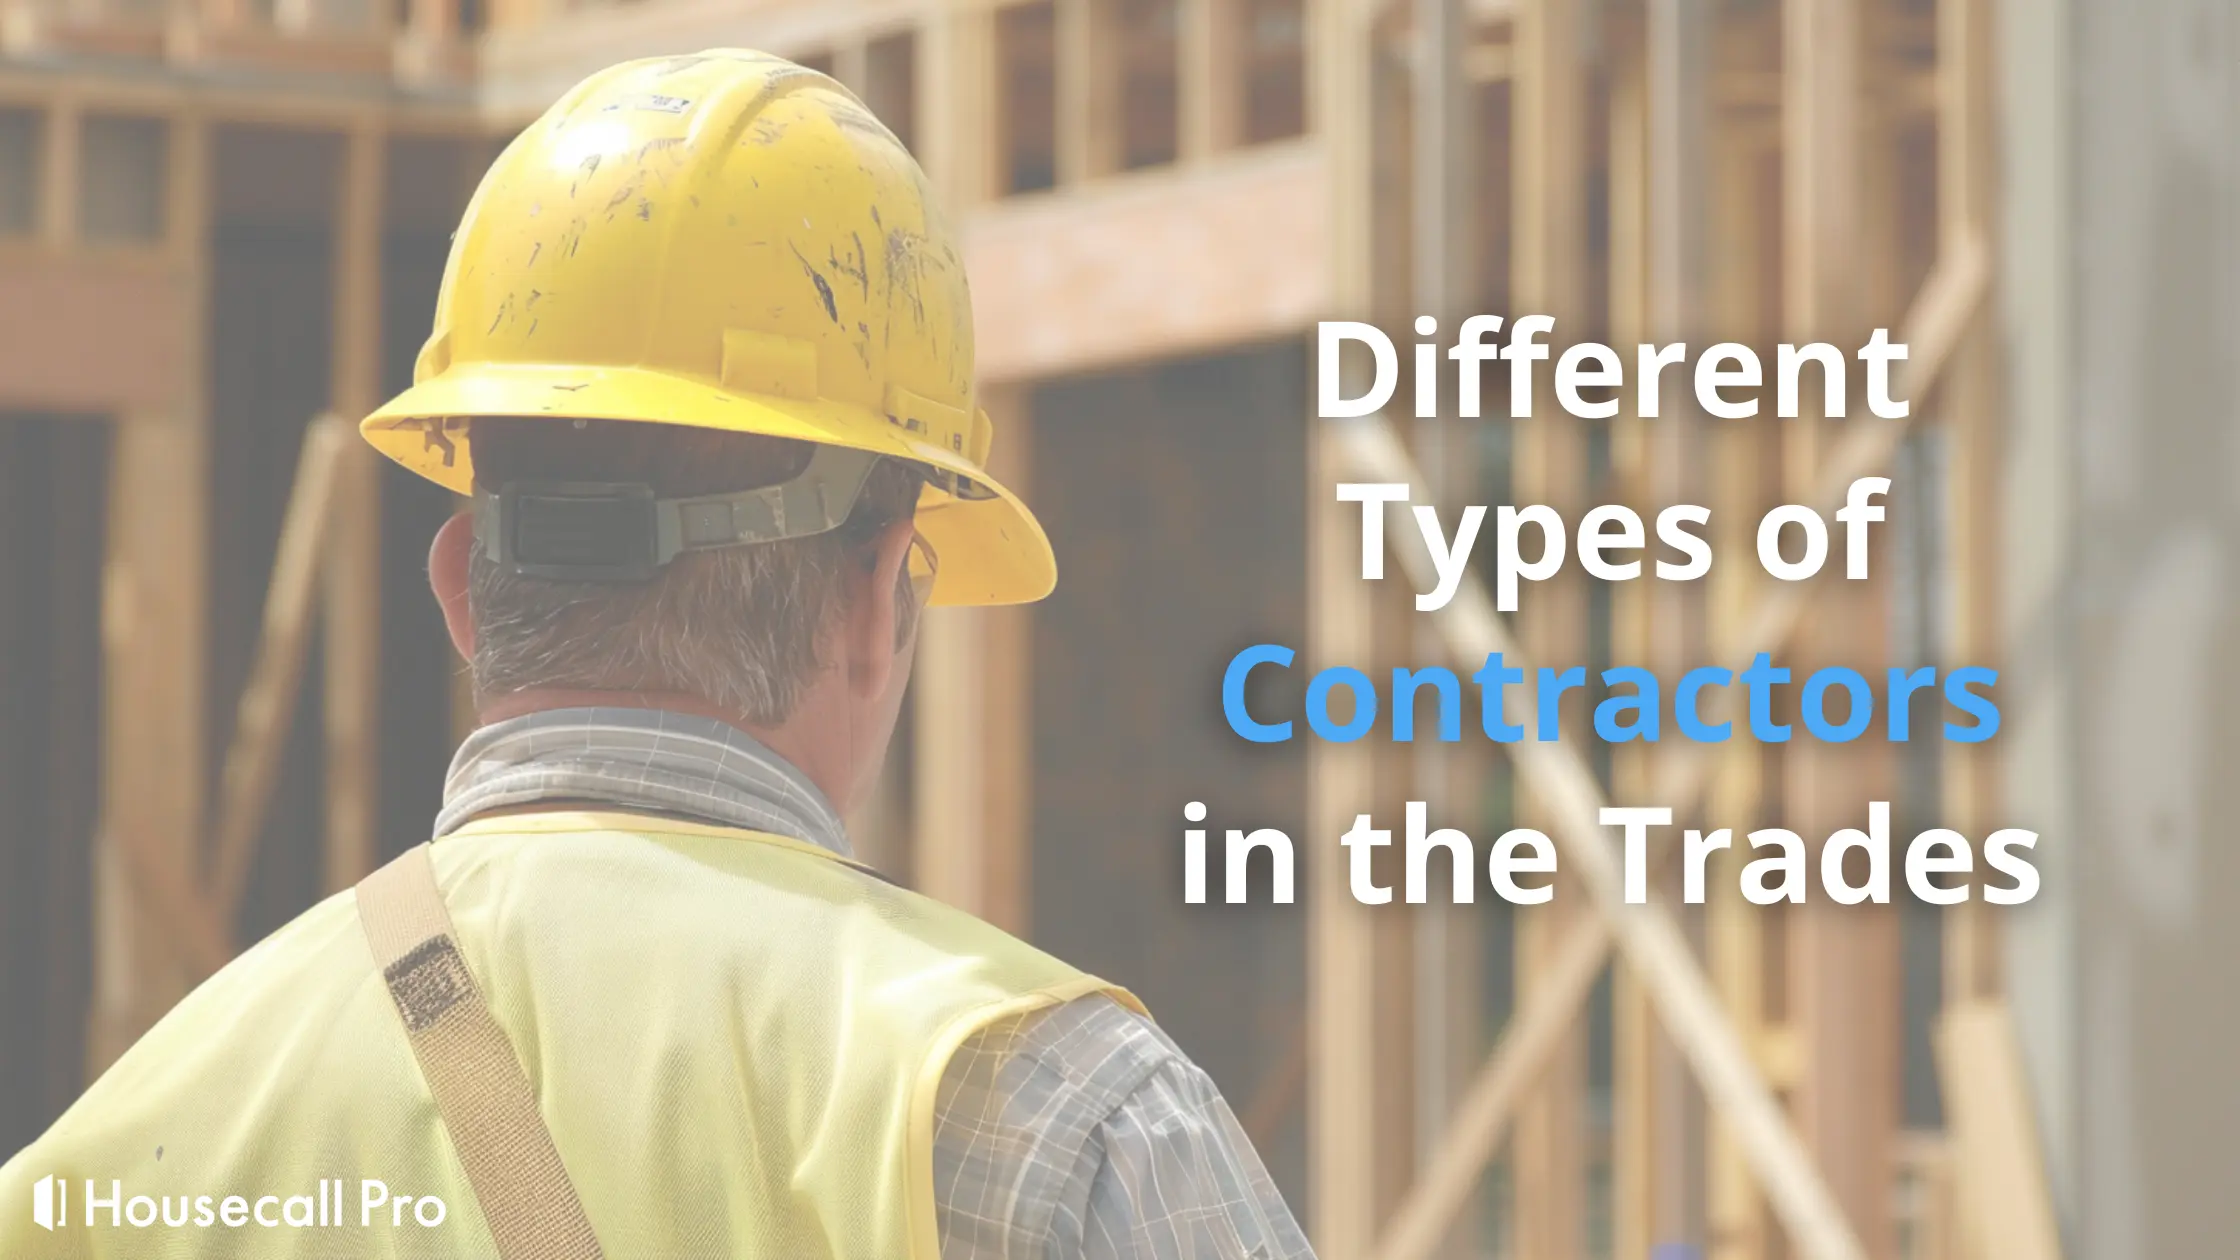 Different Types of Contractors